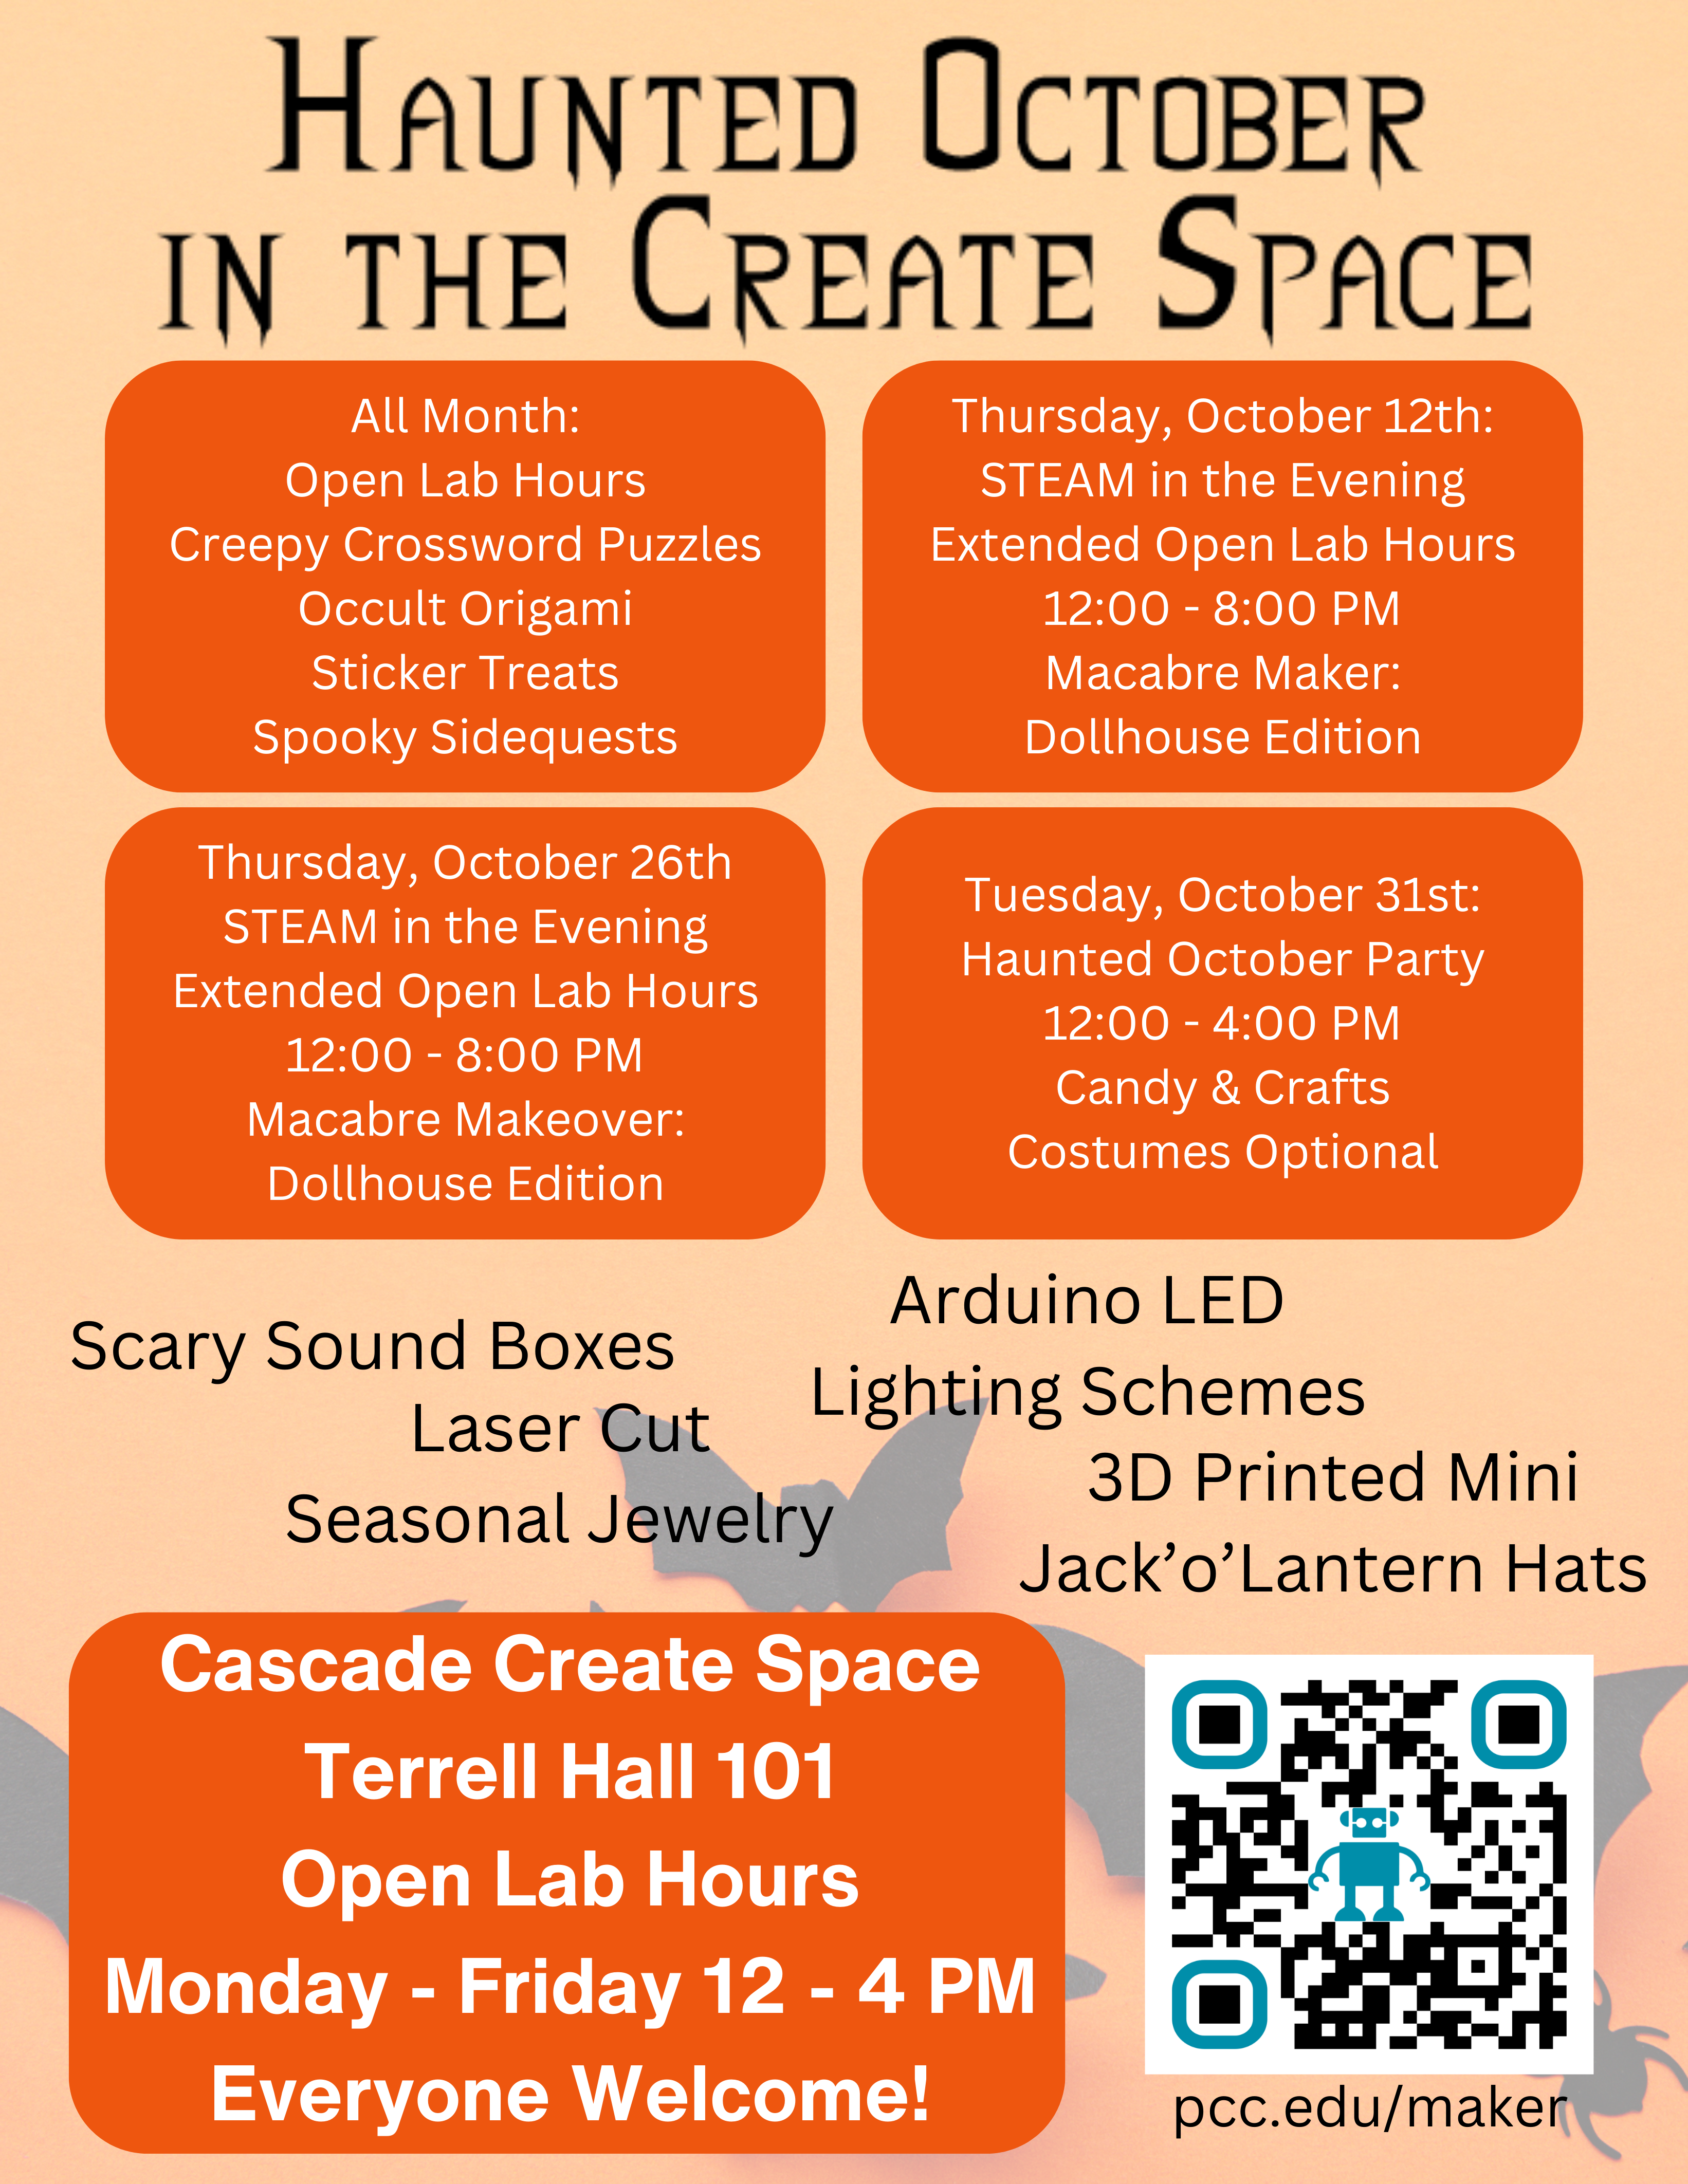 Cascade Create Space Terrell Hall 101 Open Lab Hours Monday - Friday 12 - 4 PM Everyone Welcome! pcc.edu/maker Arduino LED Lighting Schemes Scary Sound Boxes Laser Cut Seasonal Jewelry 3D Printed Mini Jack’o’Lantern Hats All Month: Open Lab Hours Creepy Crossword Puzzles Occult Origami Sticker Treats Spooky Sidequests Thursday, October 12th: STEAM in the Evening Extended Open Lab Hours 12:00 - 8:00 PM Macabre Maker: Dollhouse Edition Thursday, October 26th STEAM in the Evening Extended Open Lab Hours 12:00 - 8:00 PM Macabre Makeover: Dollhouse Edition Tuesday, October 31st: Haunted October Party 12:00 - 4:00 PM Candy & Crafts Costumes Optional 